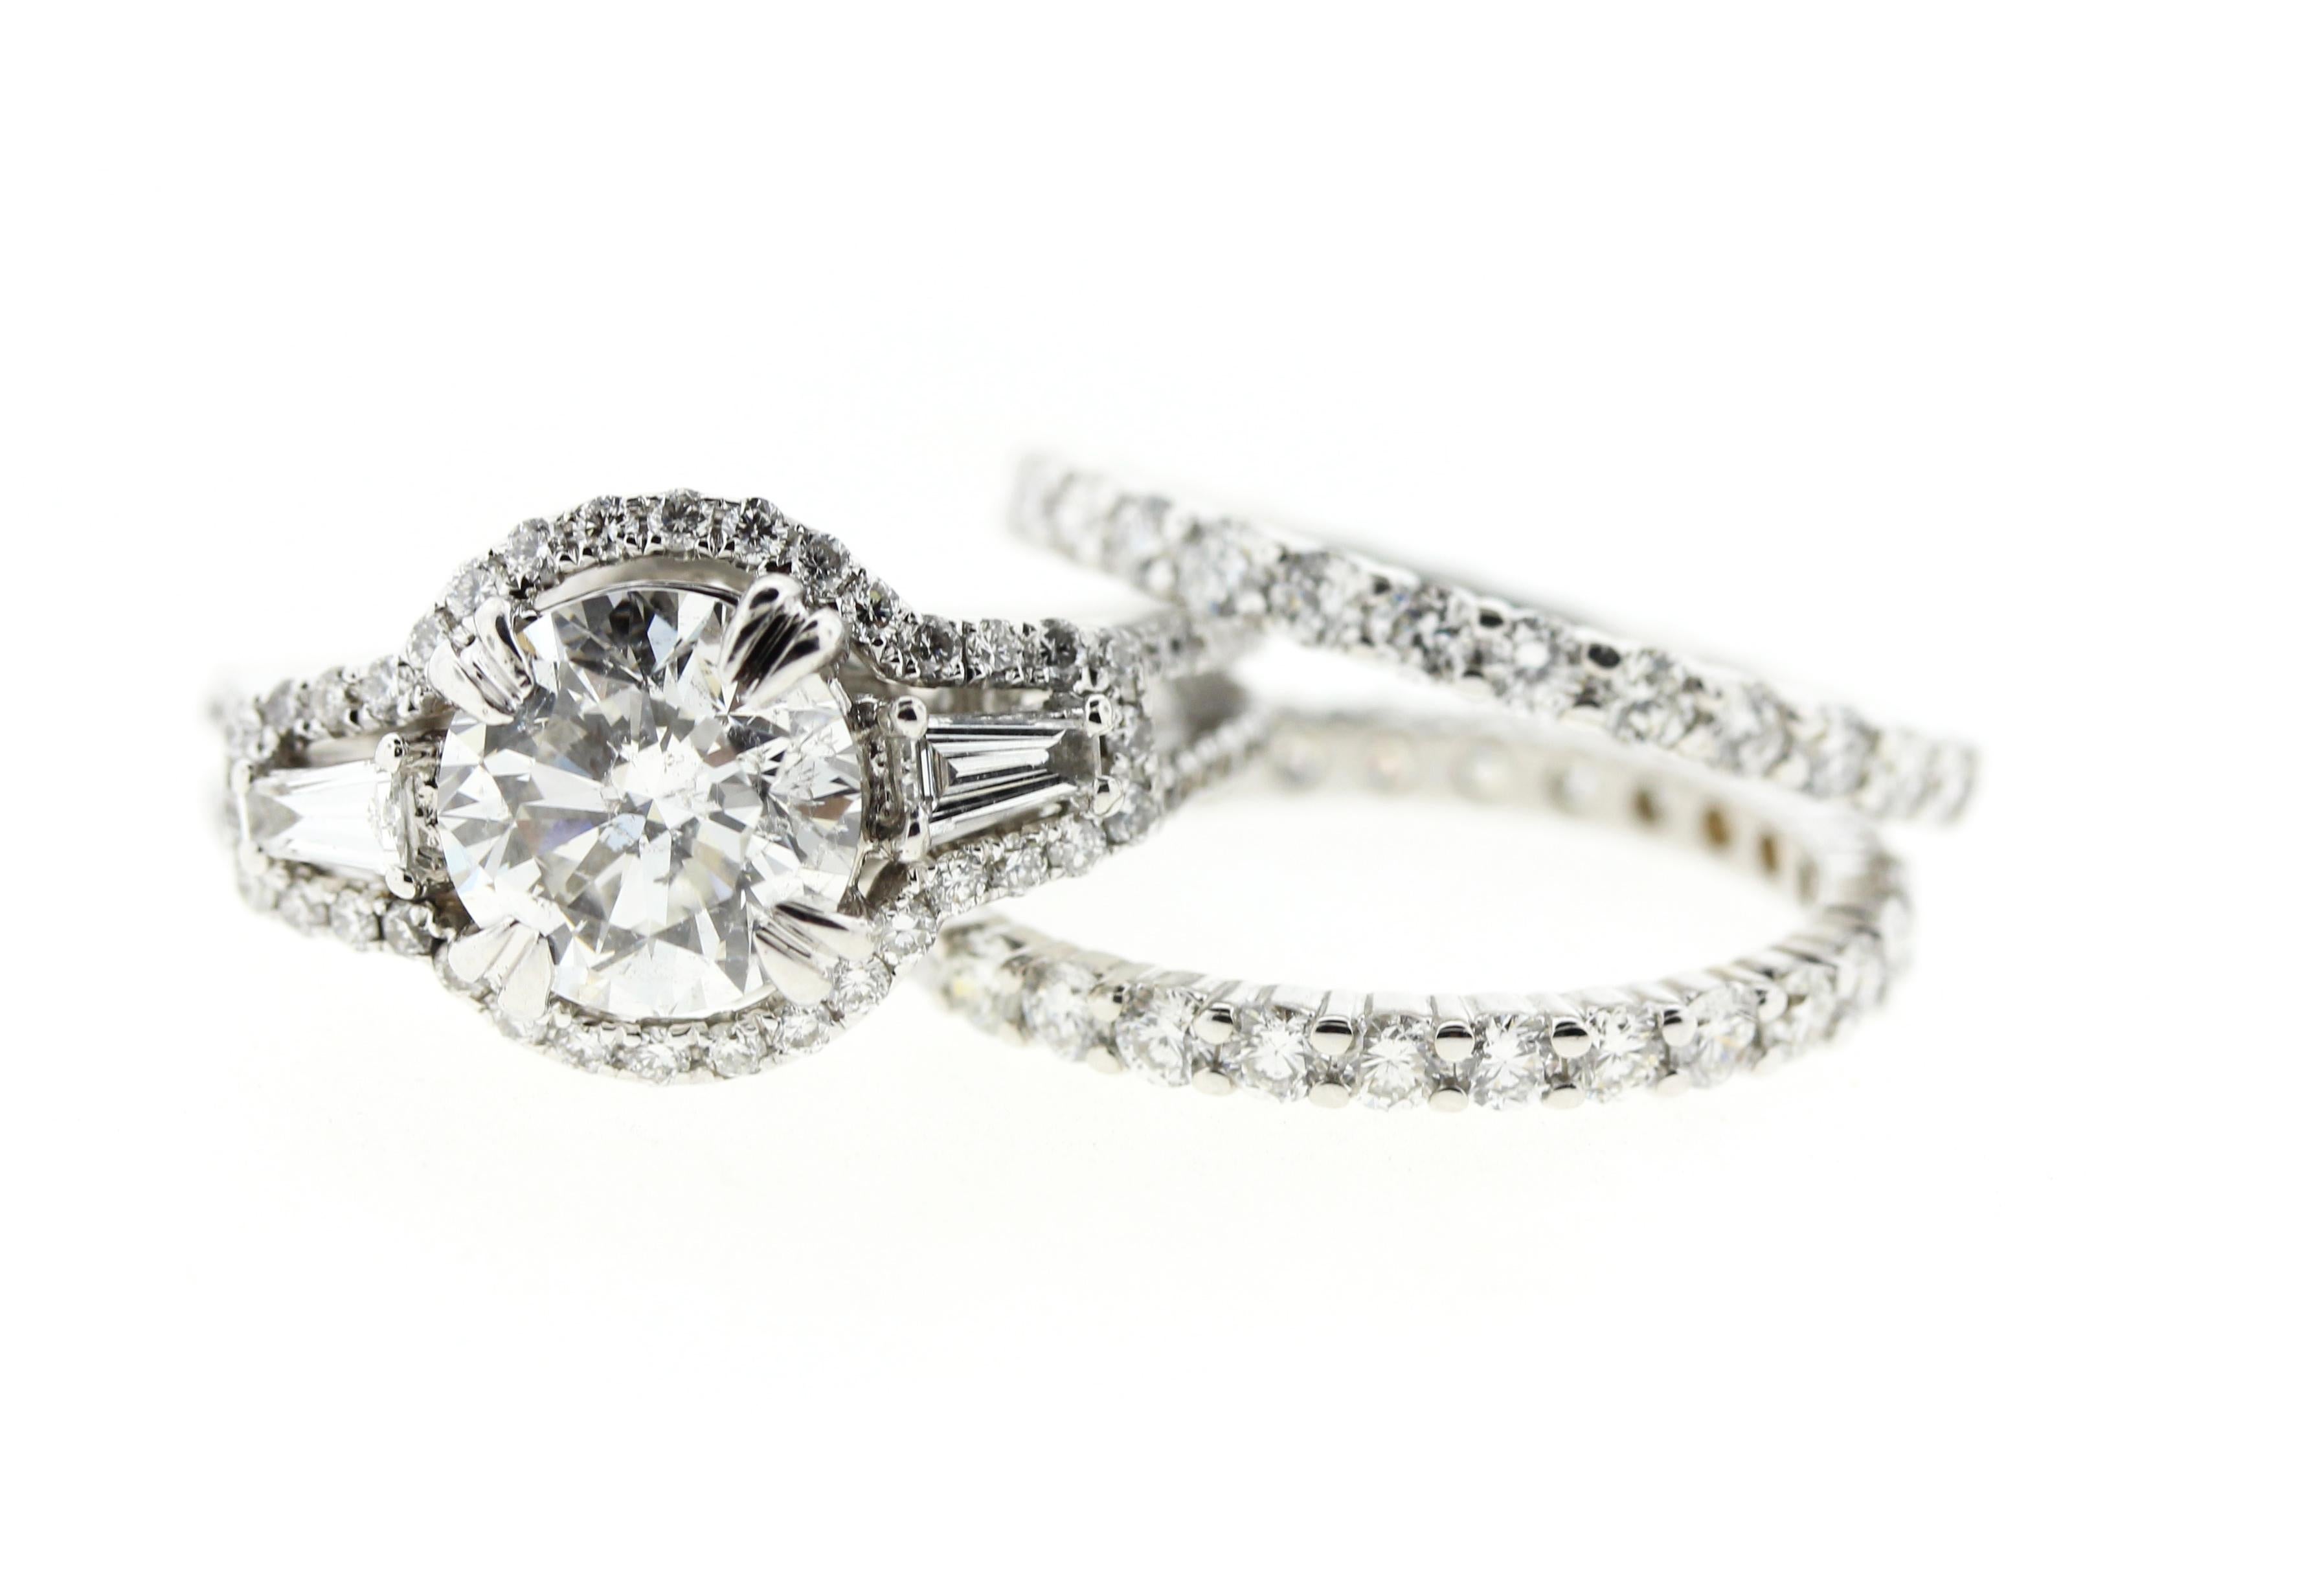 This round diamond engagement ring features a combination of multiple elements to create a truly unique look. Set in platinum, the 1.75 center round diamond is surrounded by a diamond halo. Two tapered baguettes create a timeless look while a split